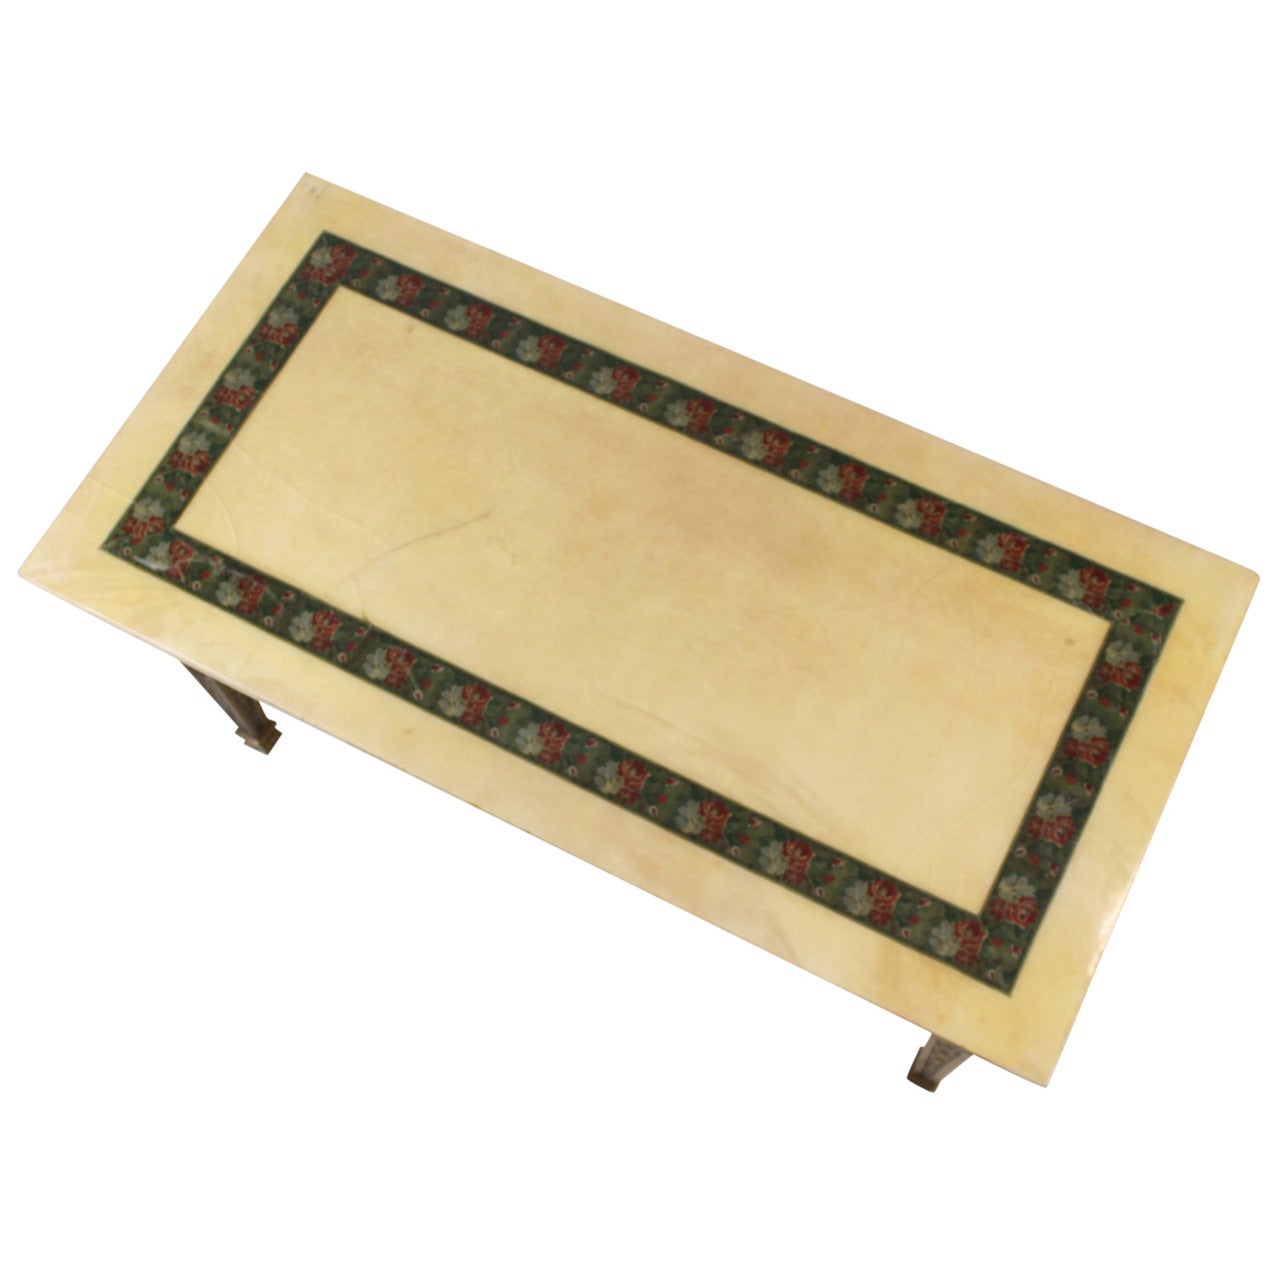 Aldo Tura Coffee Table with Flower Stitched Inlay under Lacquered Goatskin For Sale